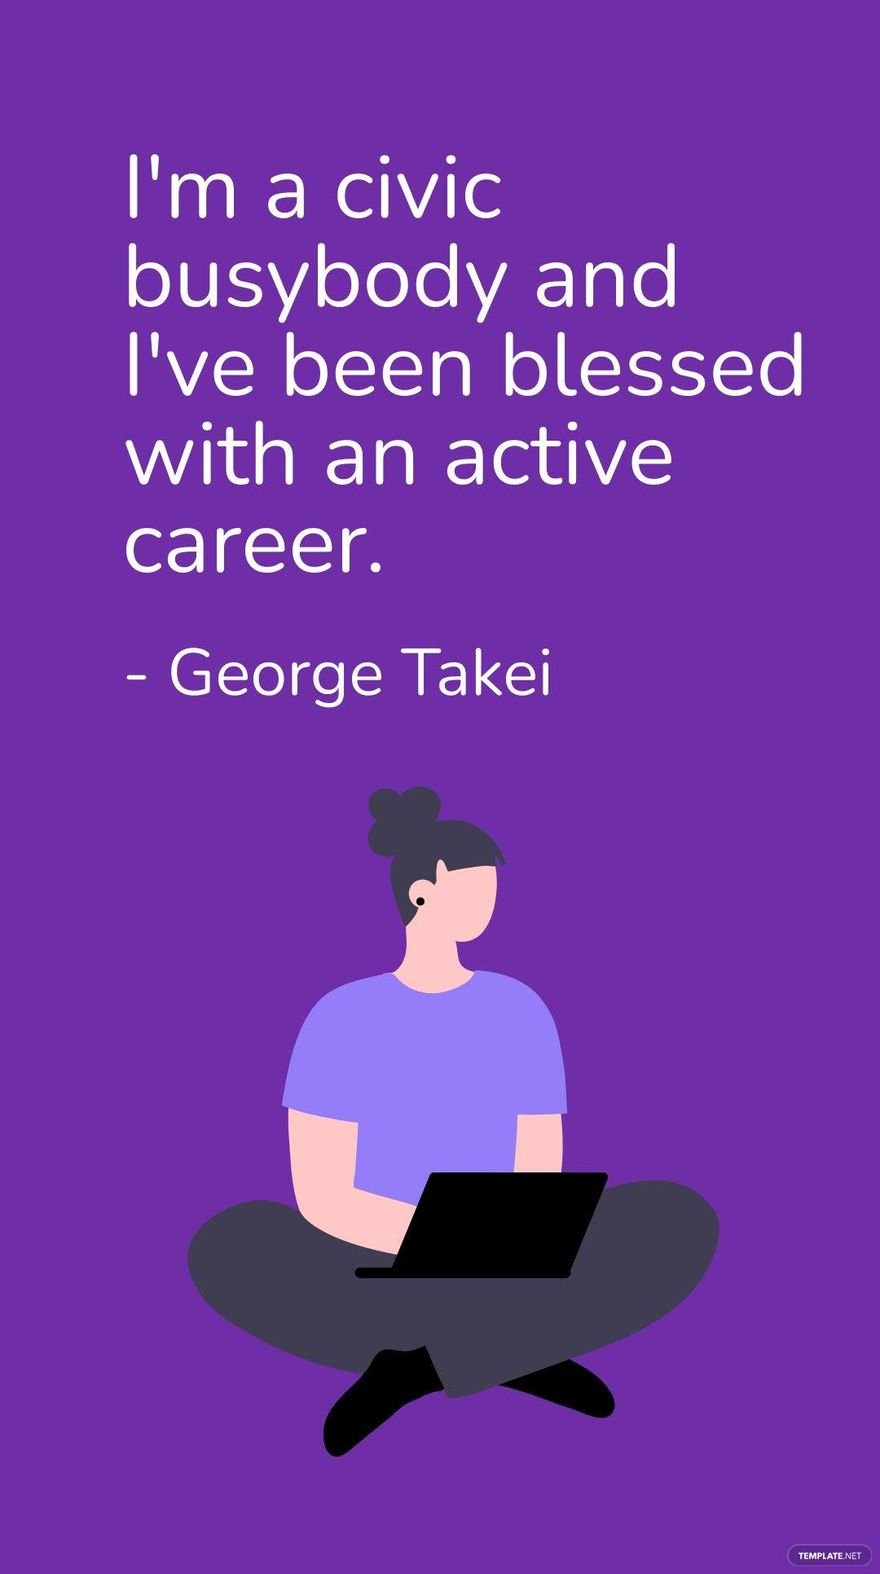 George Takei - I'm a civic busybody and I've been blessed with an active career.